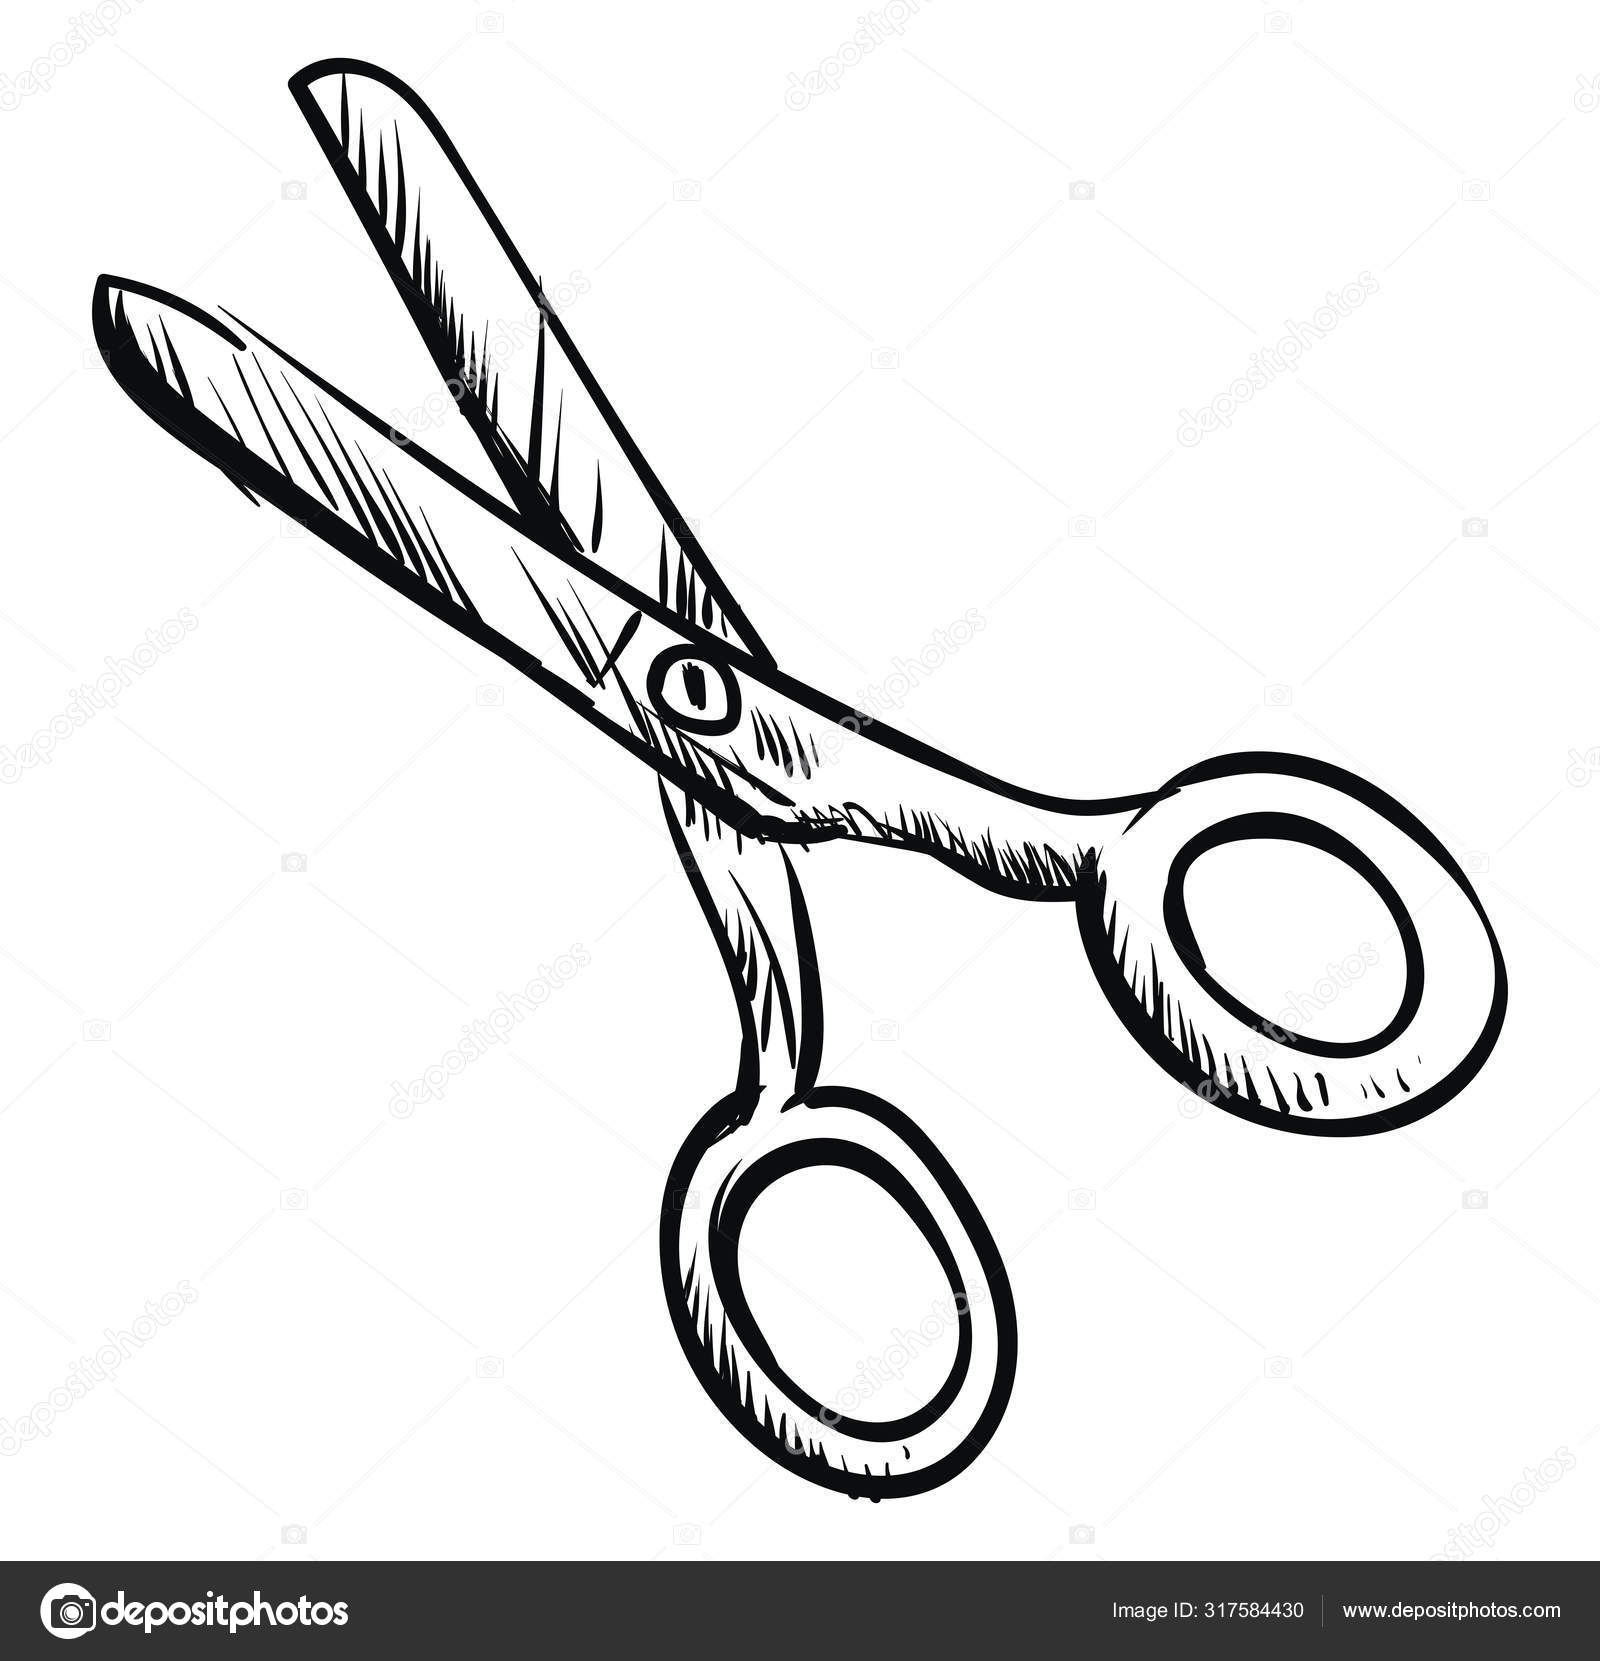 Printable Scissors Outline Coloring Pages | Sewing machine drawing, Scissors  drawing, Coloring pages